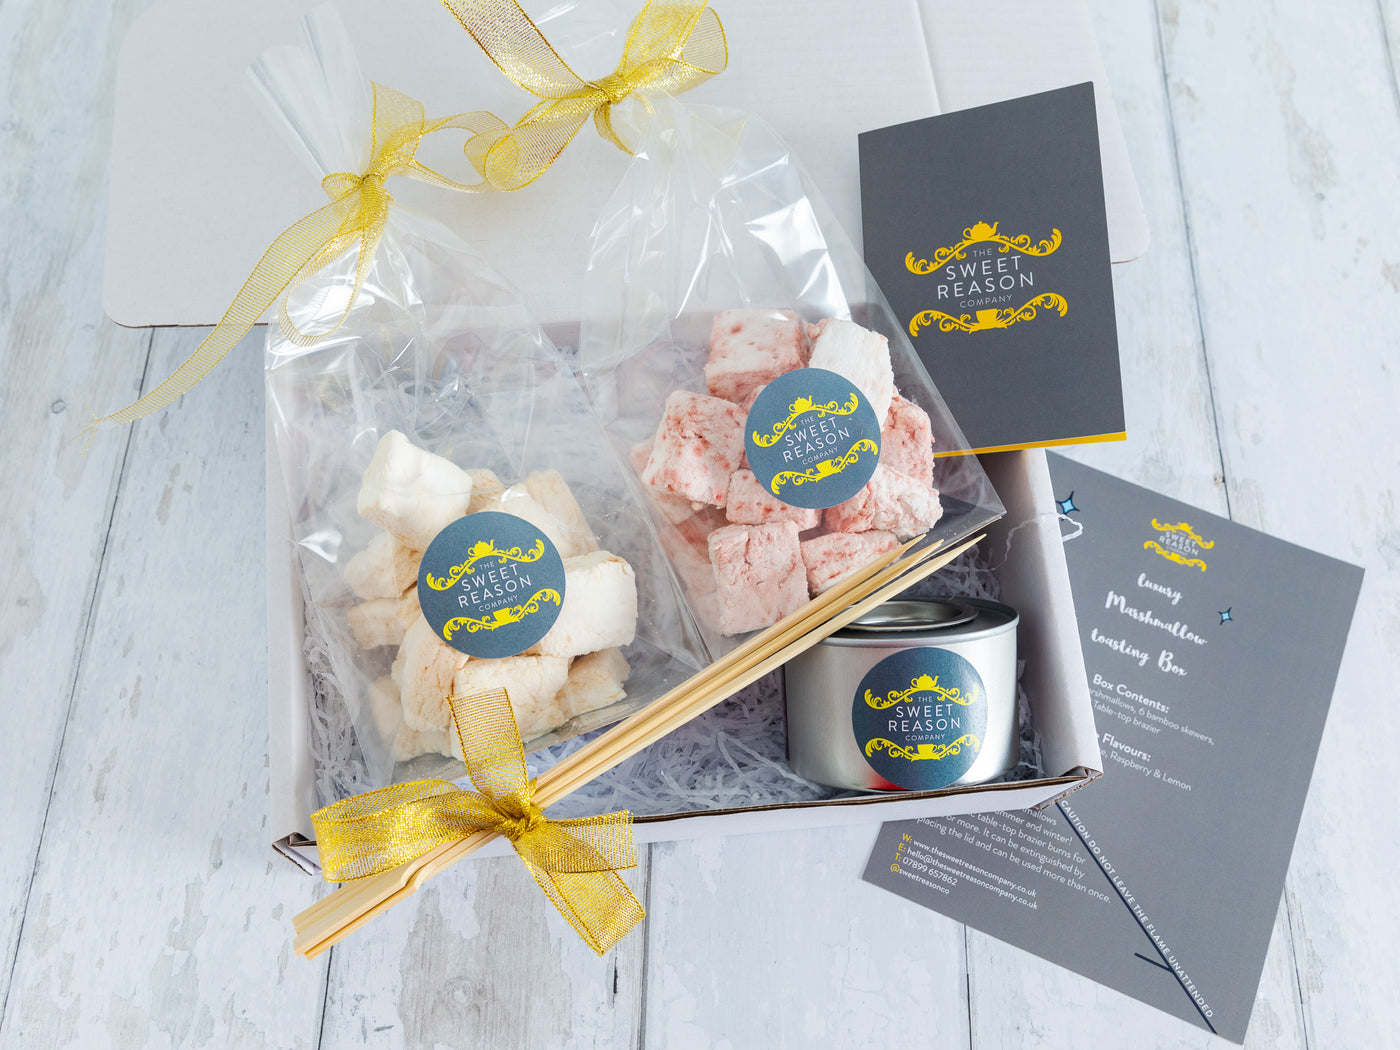 Marshmallow Toasting Kit - 2 Bags Of Artisan Marshmallows, Skewers and Brazier Inside A Luxury Gift Box